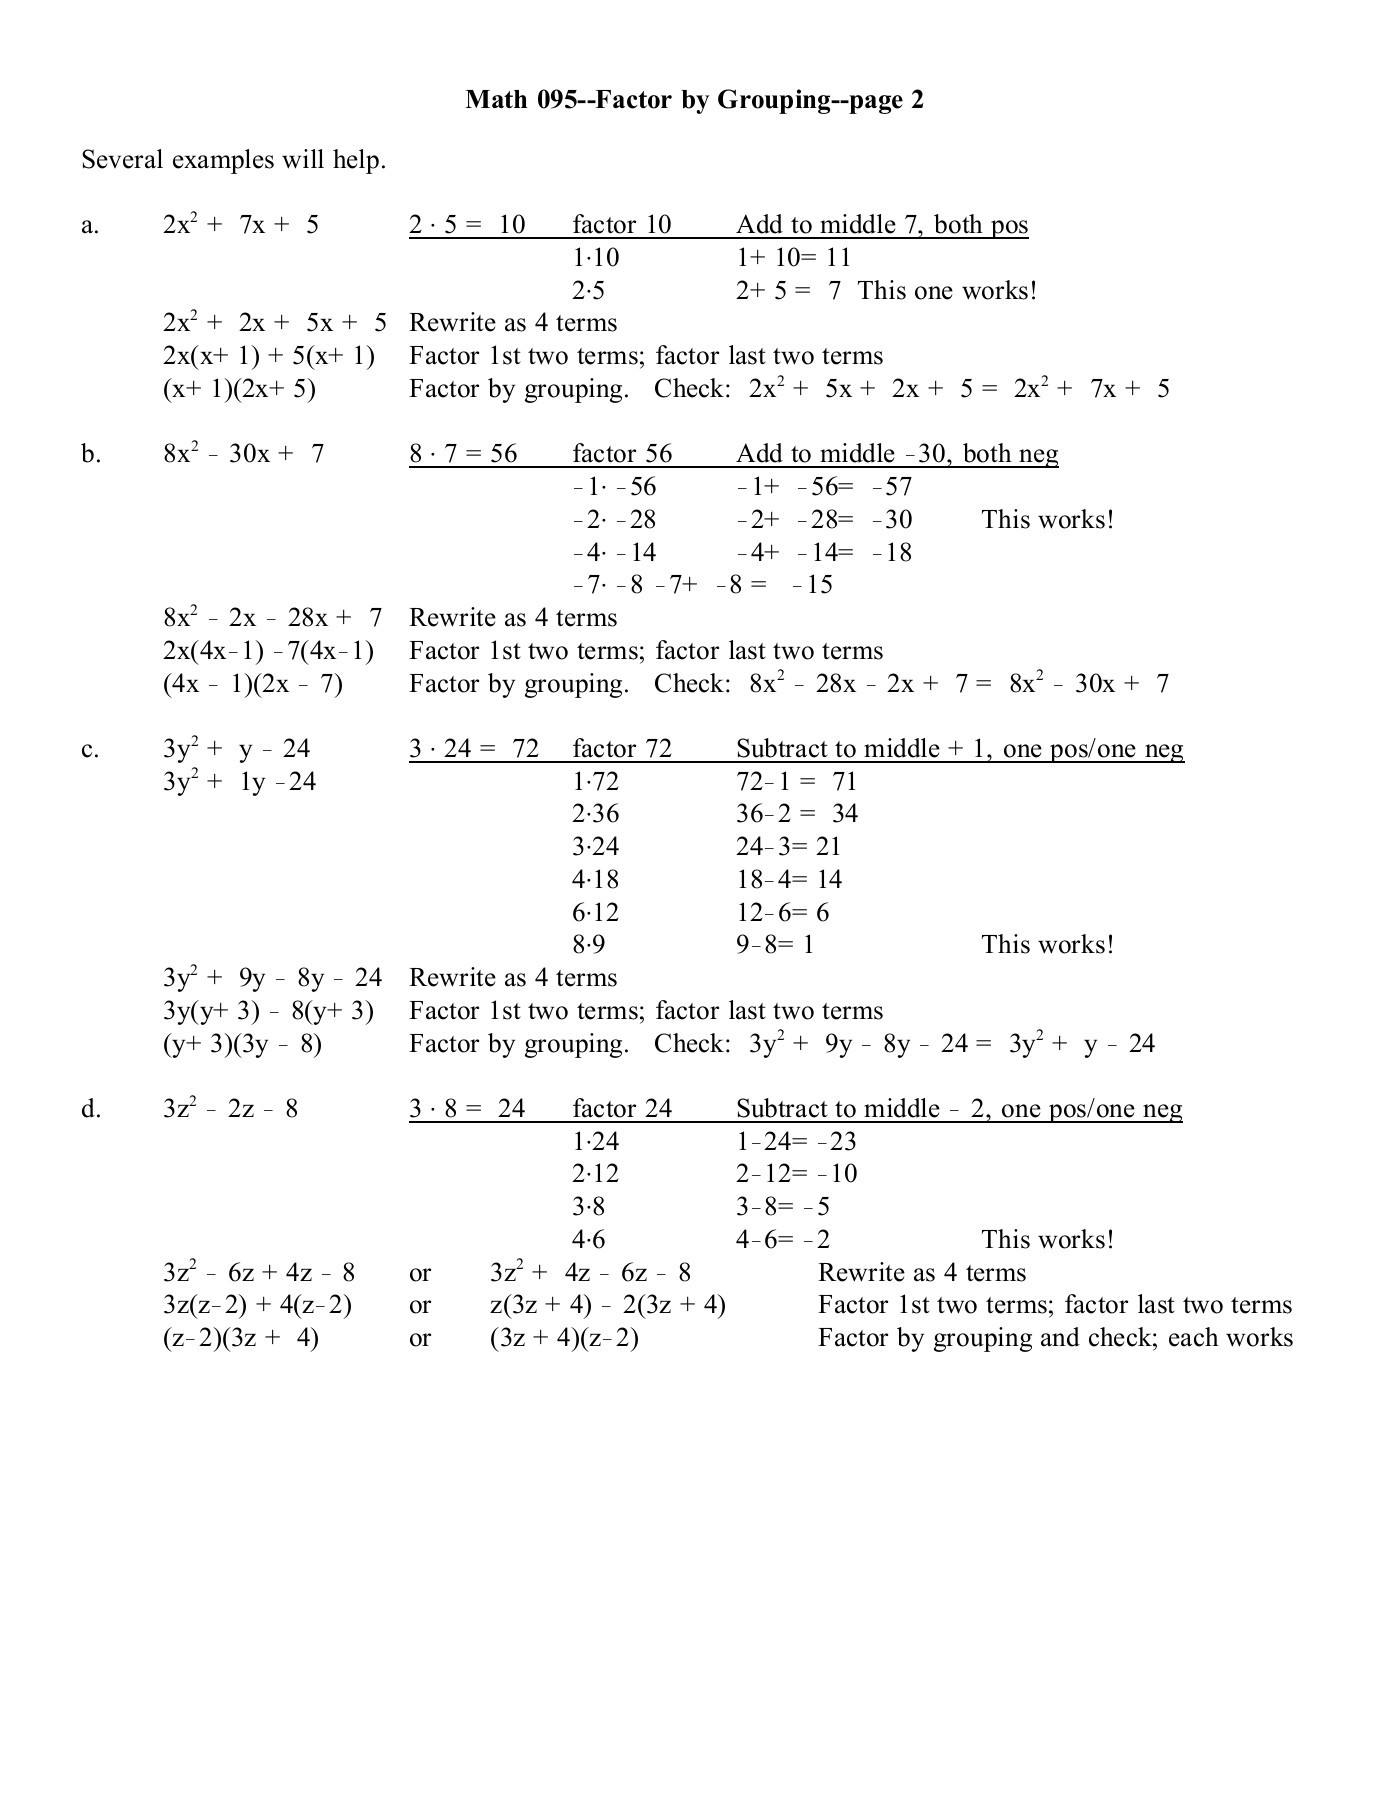 Factoring by Grouping Worksheet 7 5 Math 095 Factor by Grouping Page 1 Csn Pages 1